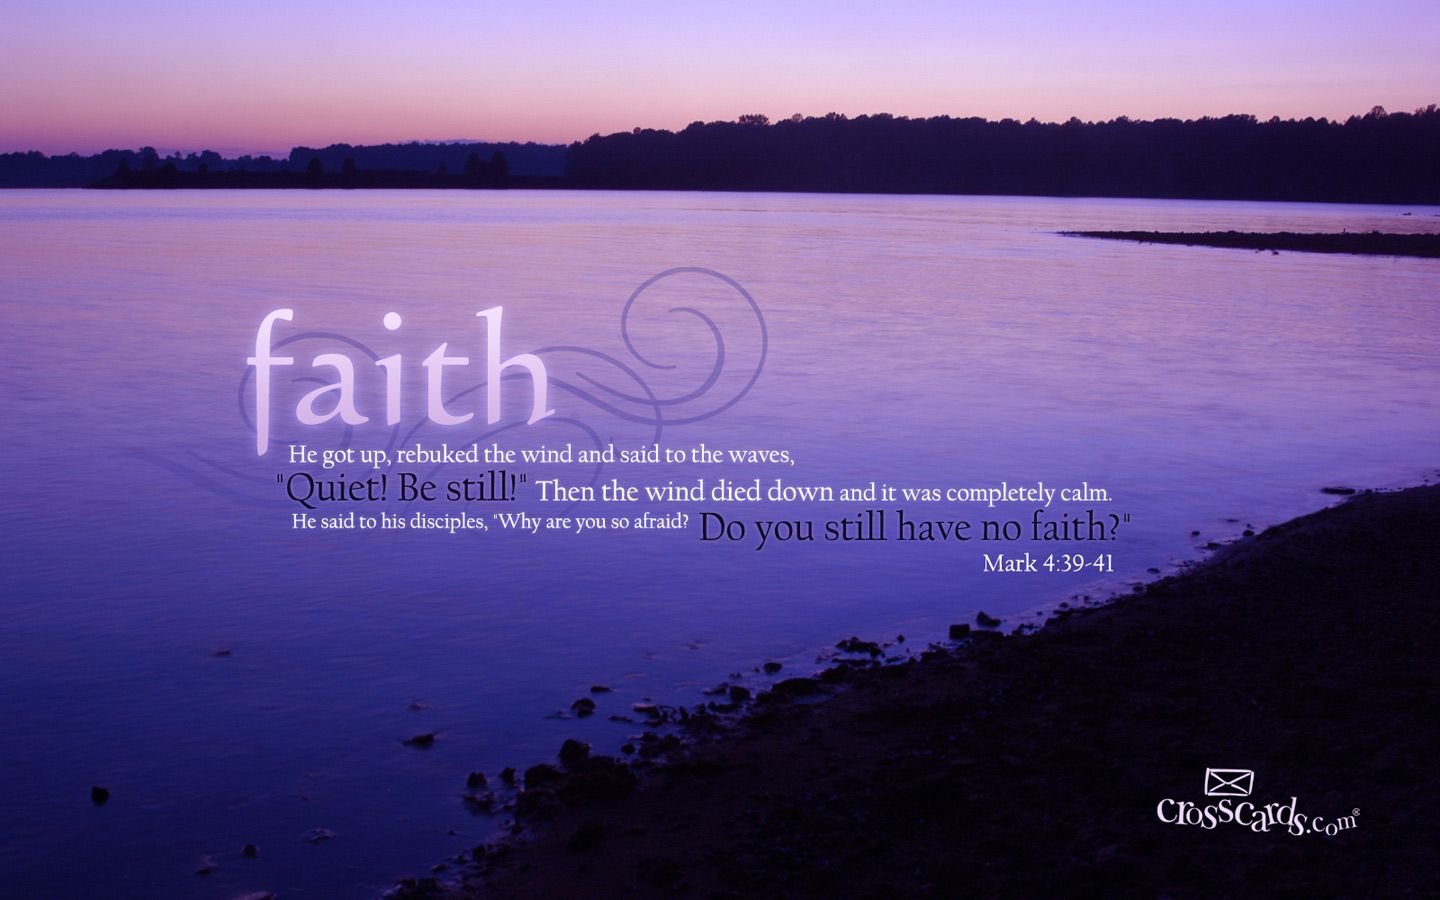 Mark 4:39-41 - Faith Wallpaper - Christian Wallpapers and Backgrounds